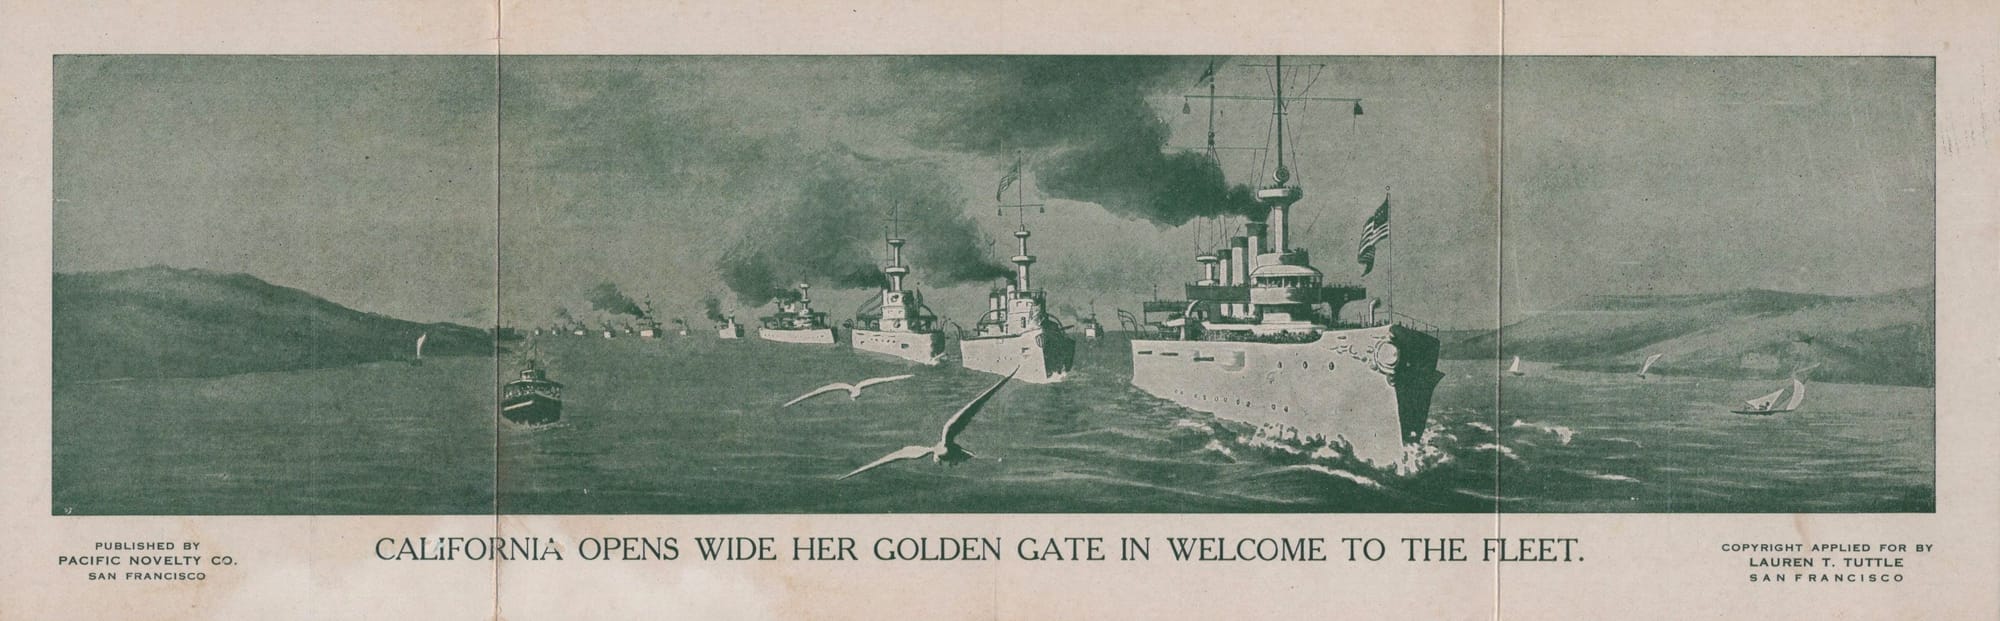 The Great White Fleet, Dreadnoughts, and World War I